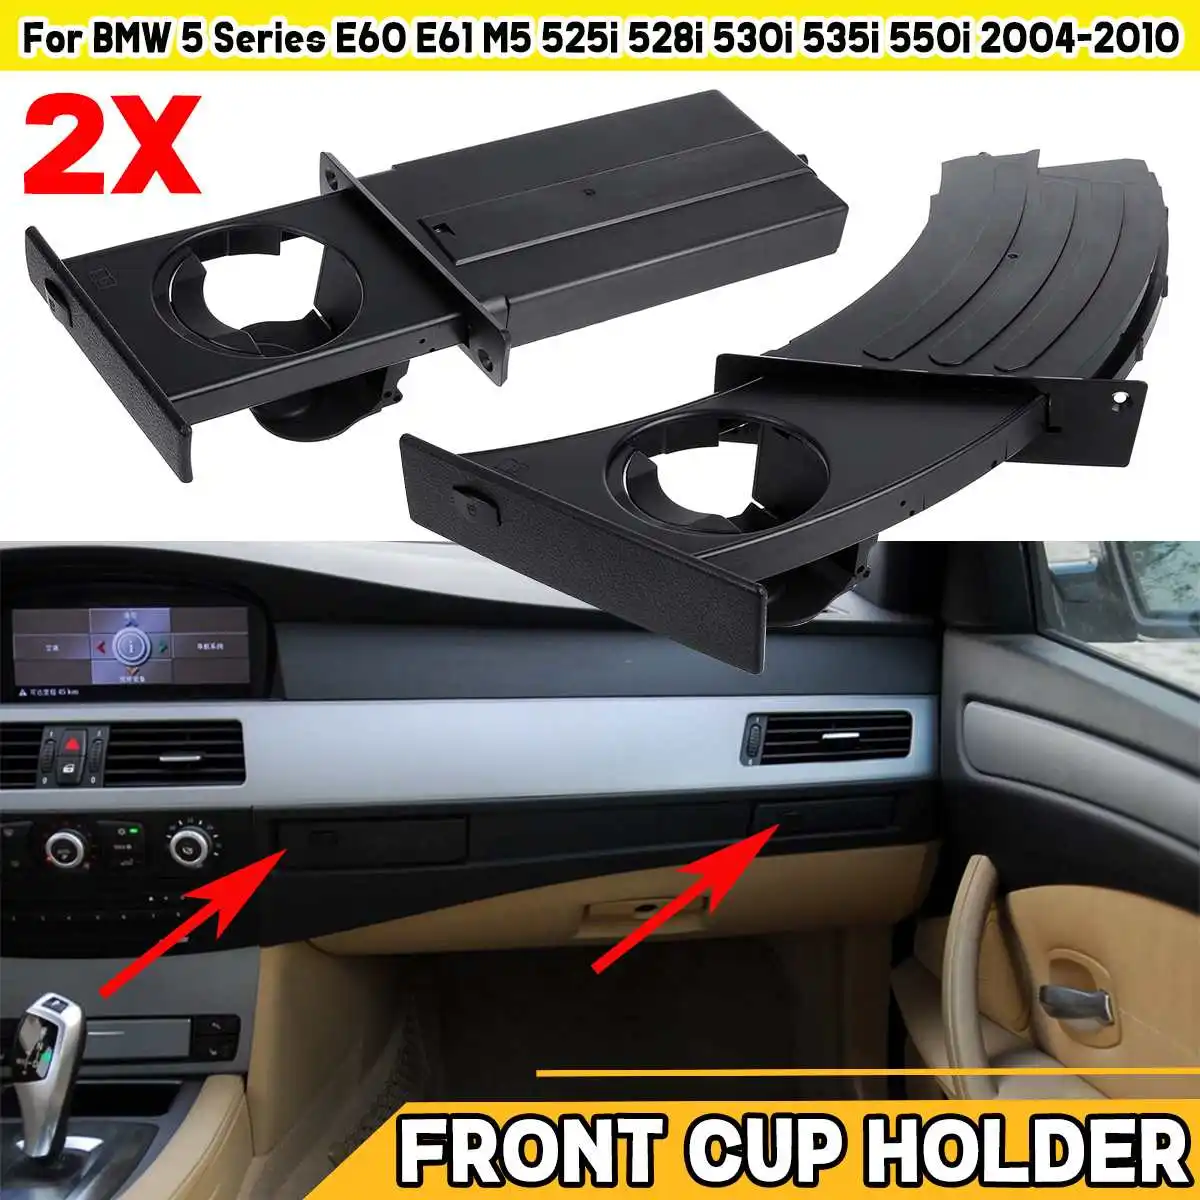 Details about   For 2009-2010 BMW 535i xDrive Cup Holder Right 73189BJ Cup Holder